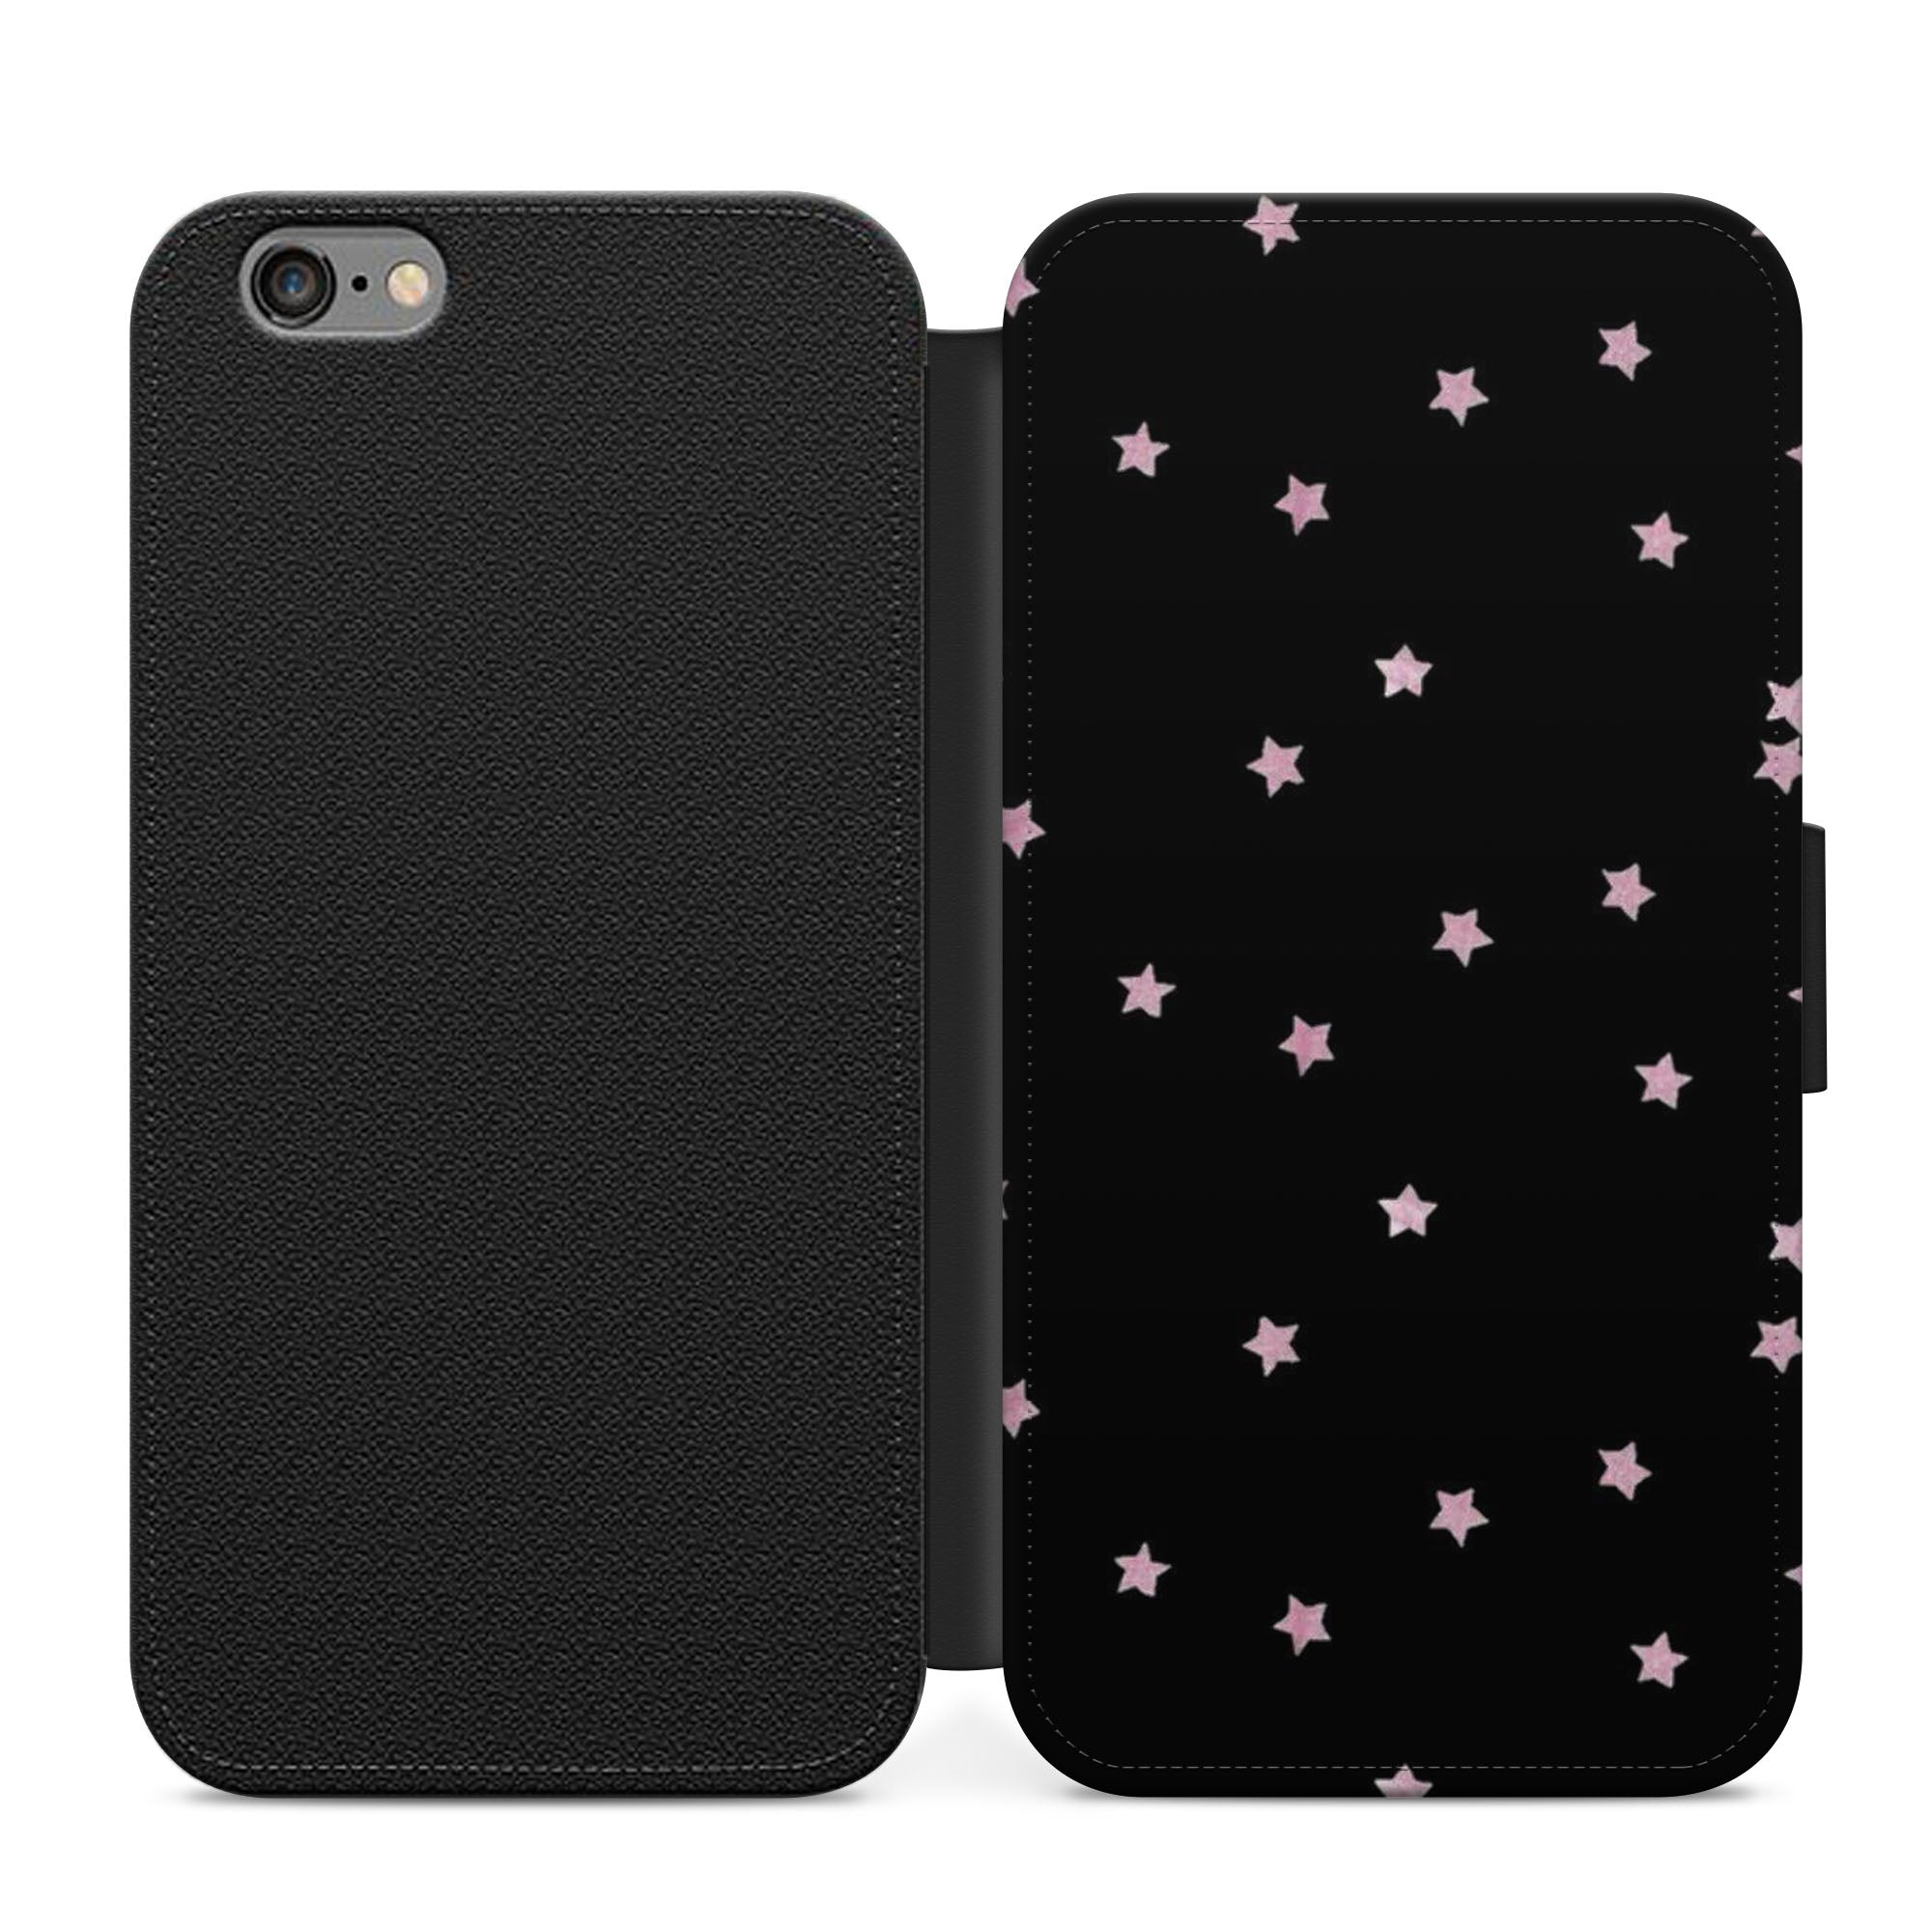 Cute Stars Faux Leather Flip Case Wallet for iPhone / Samsung